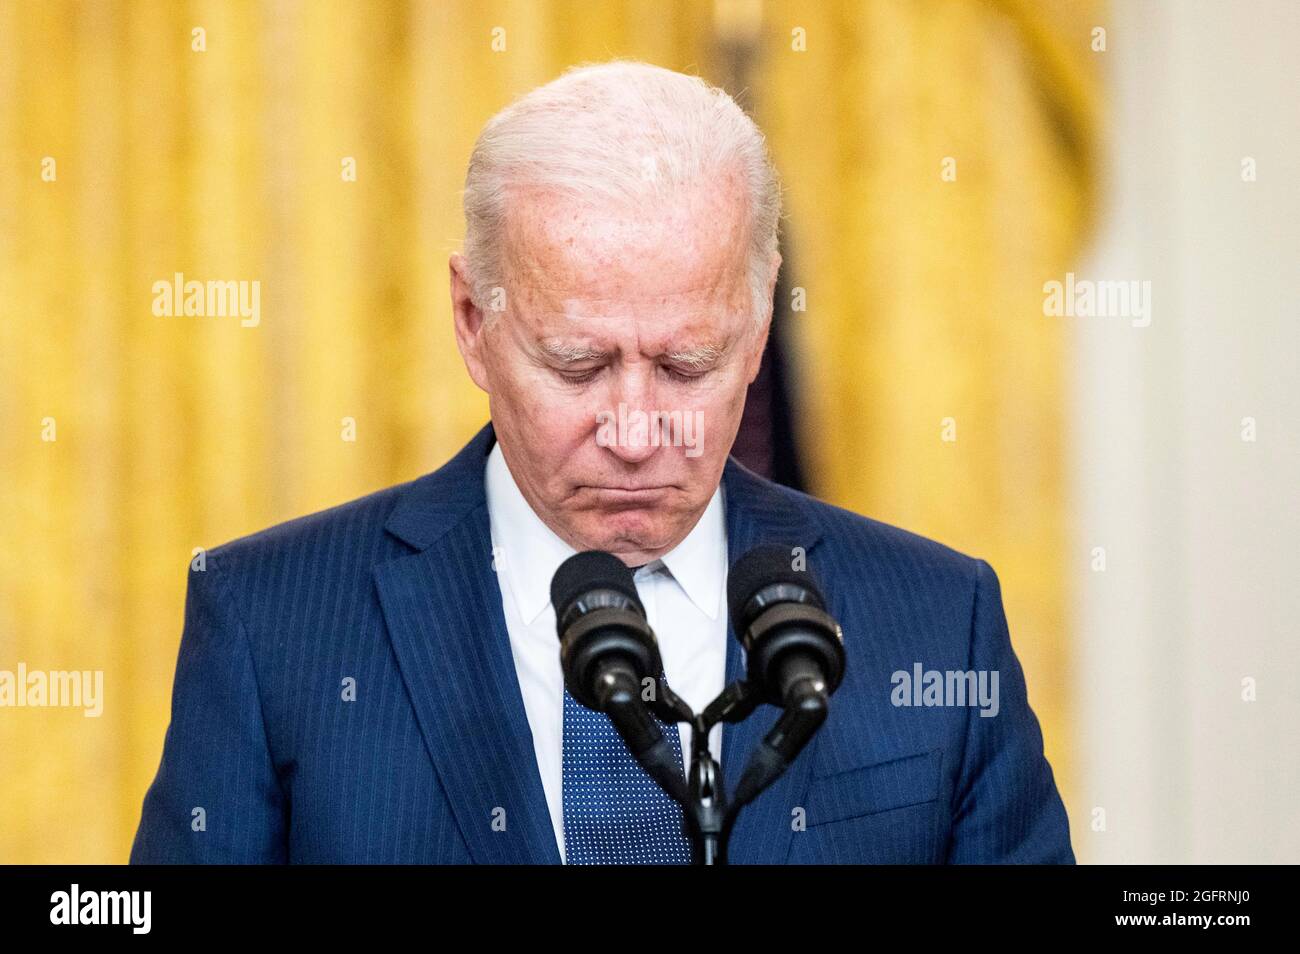 Washington, DC, USA. 26th Aug, 2021. August 26, 2021 - Washington, DC, United States: President JOE BIDEN observing a moment of silence for the victims in the terror attack at Hamid Karzai International Airport in Kabul, Afghanistan, for the U.S. service members and Afghan victims killed and wounded in the attack. (Credit Image: © Michael Brochstein/ZUMA Press Wire) Stock Photo